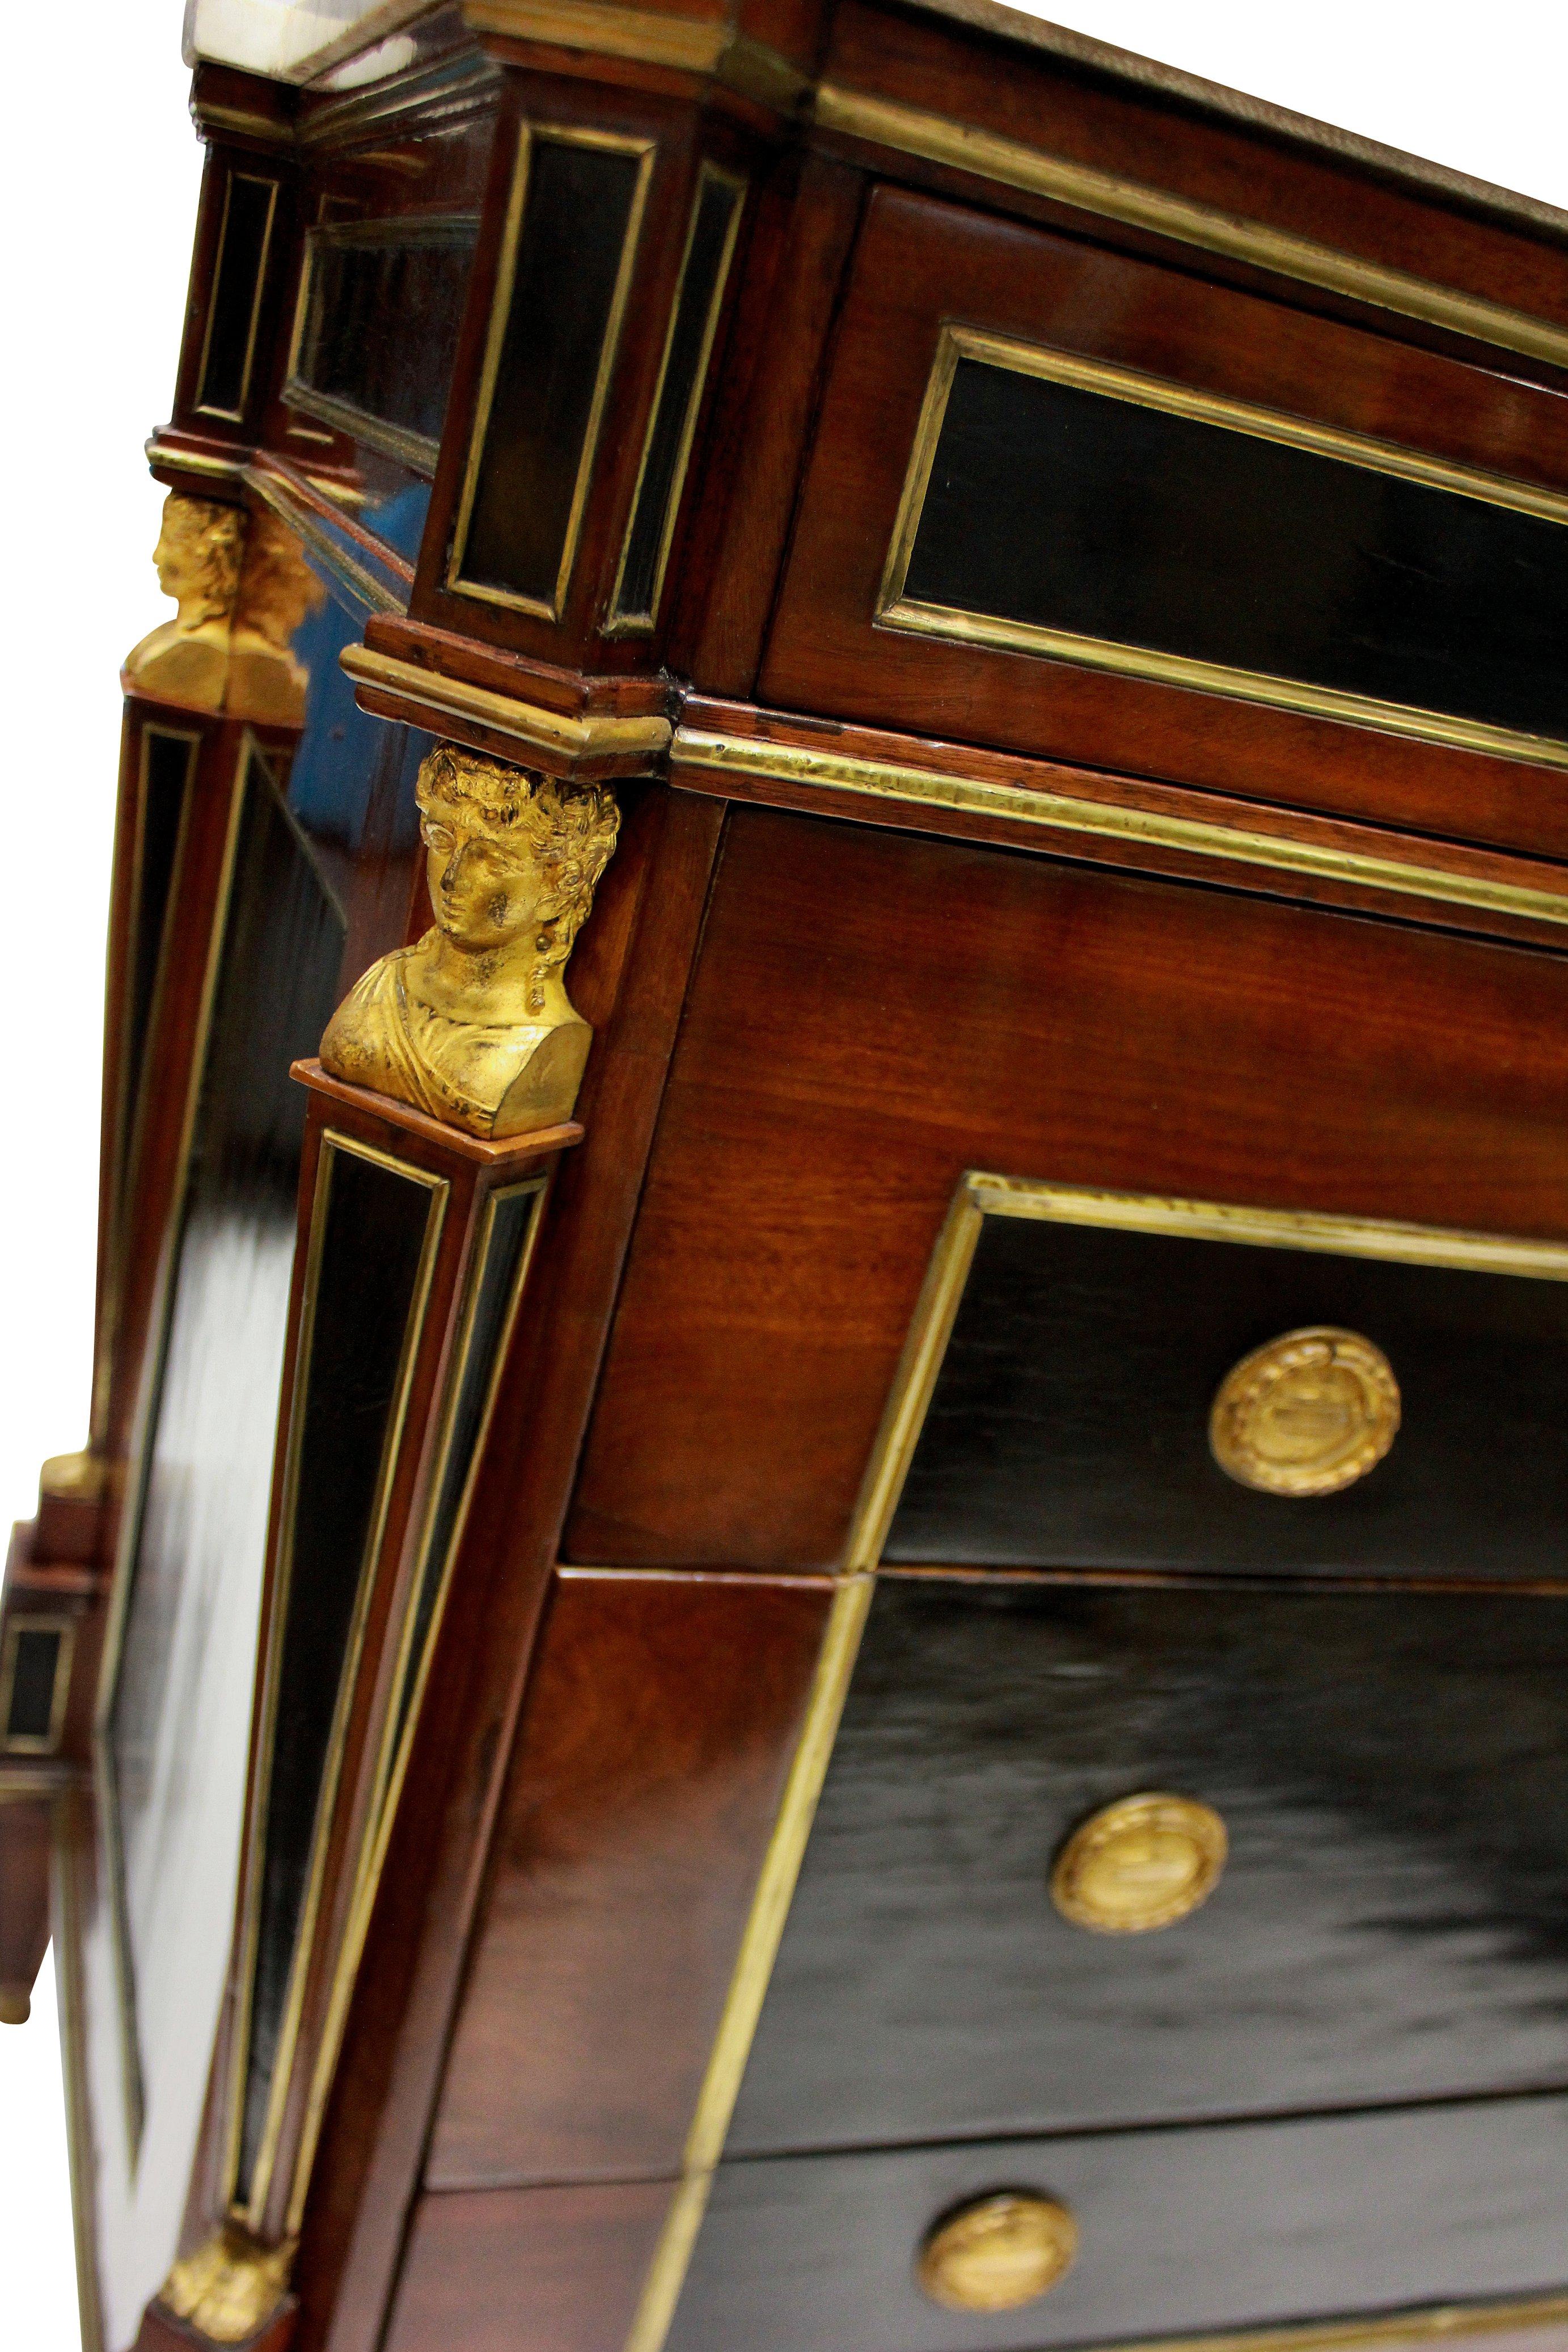 A fine Russian 18th century commode in mahogany, with ebonized panels edged in gilt brass. With classical gilt bronze caryatids and lion paw feet. Each drawer with the original locks and a handcut dove grey veined marble top.